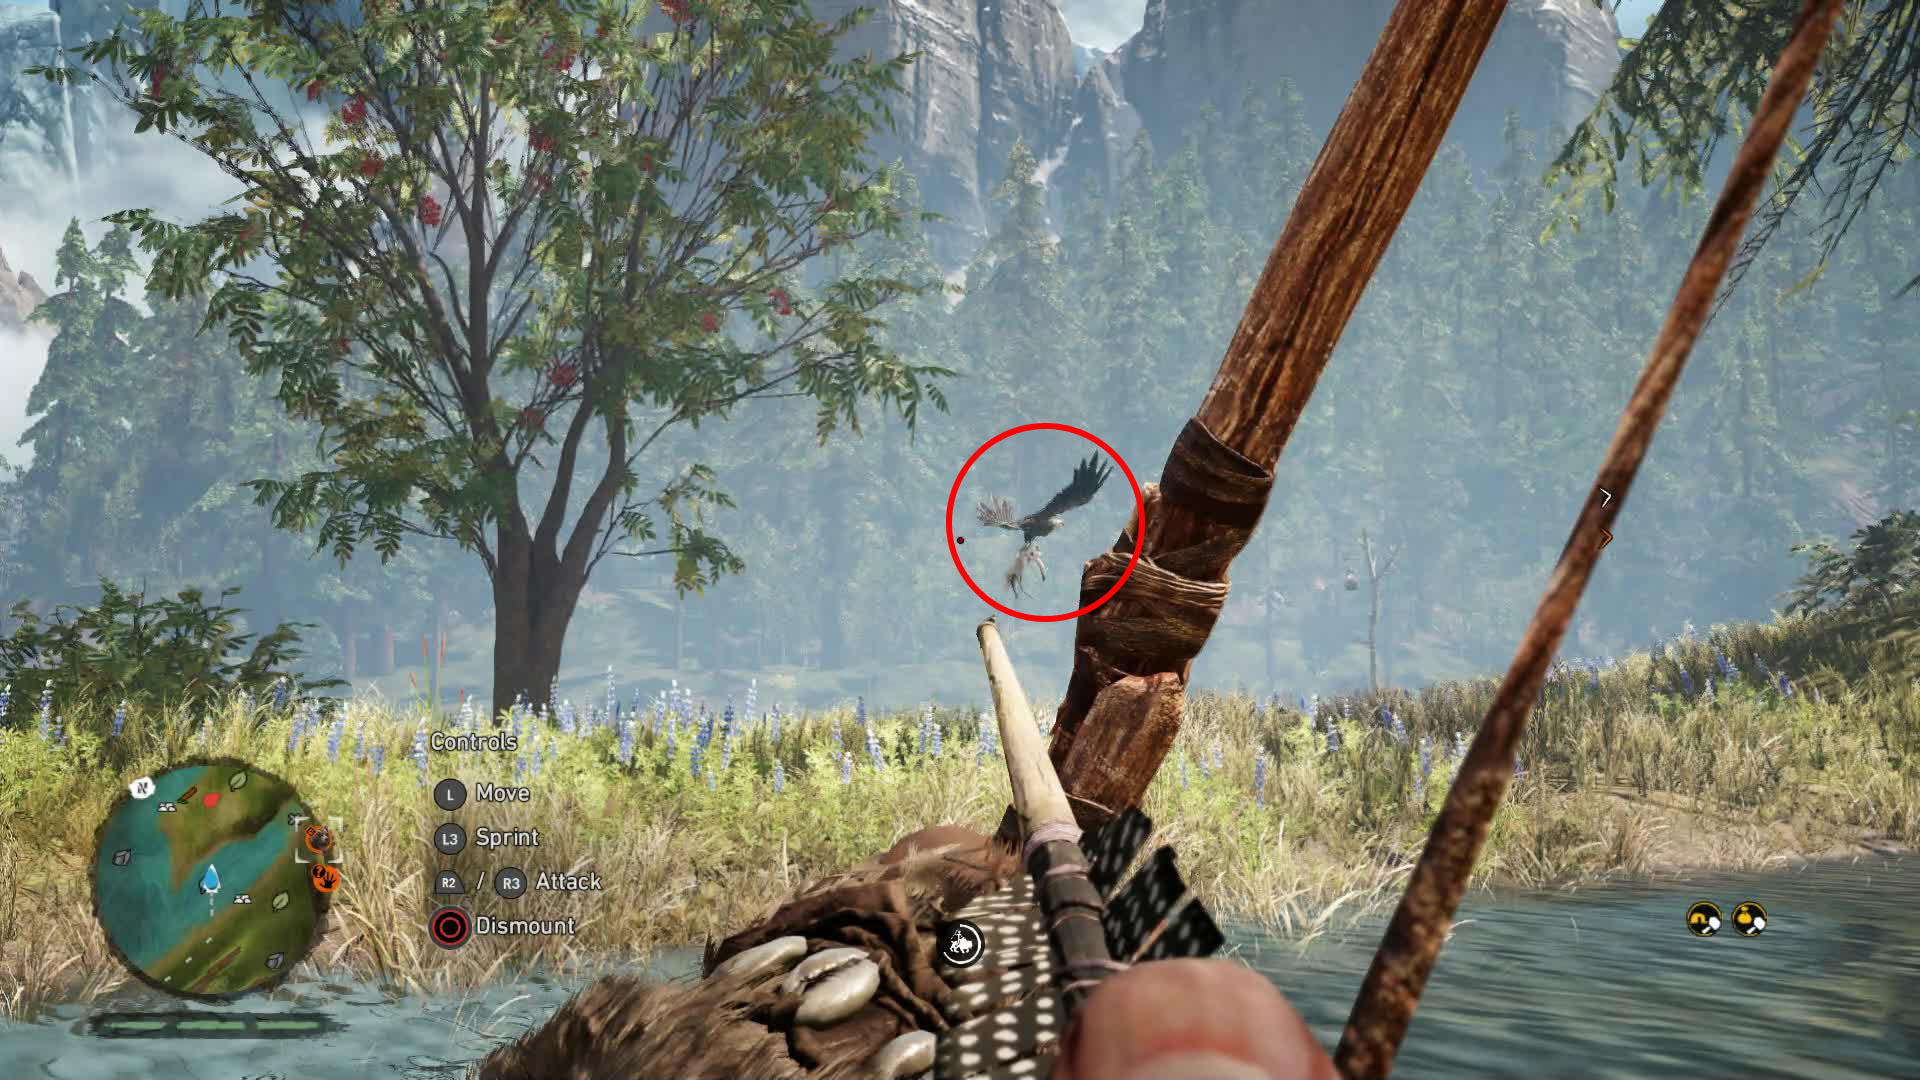 far-cry-primal-where-to-find-feathers.